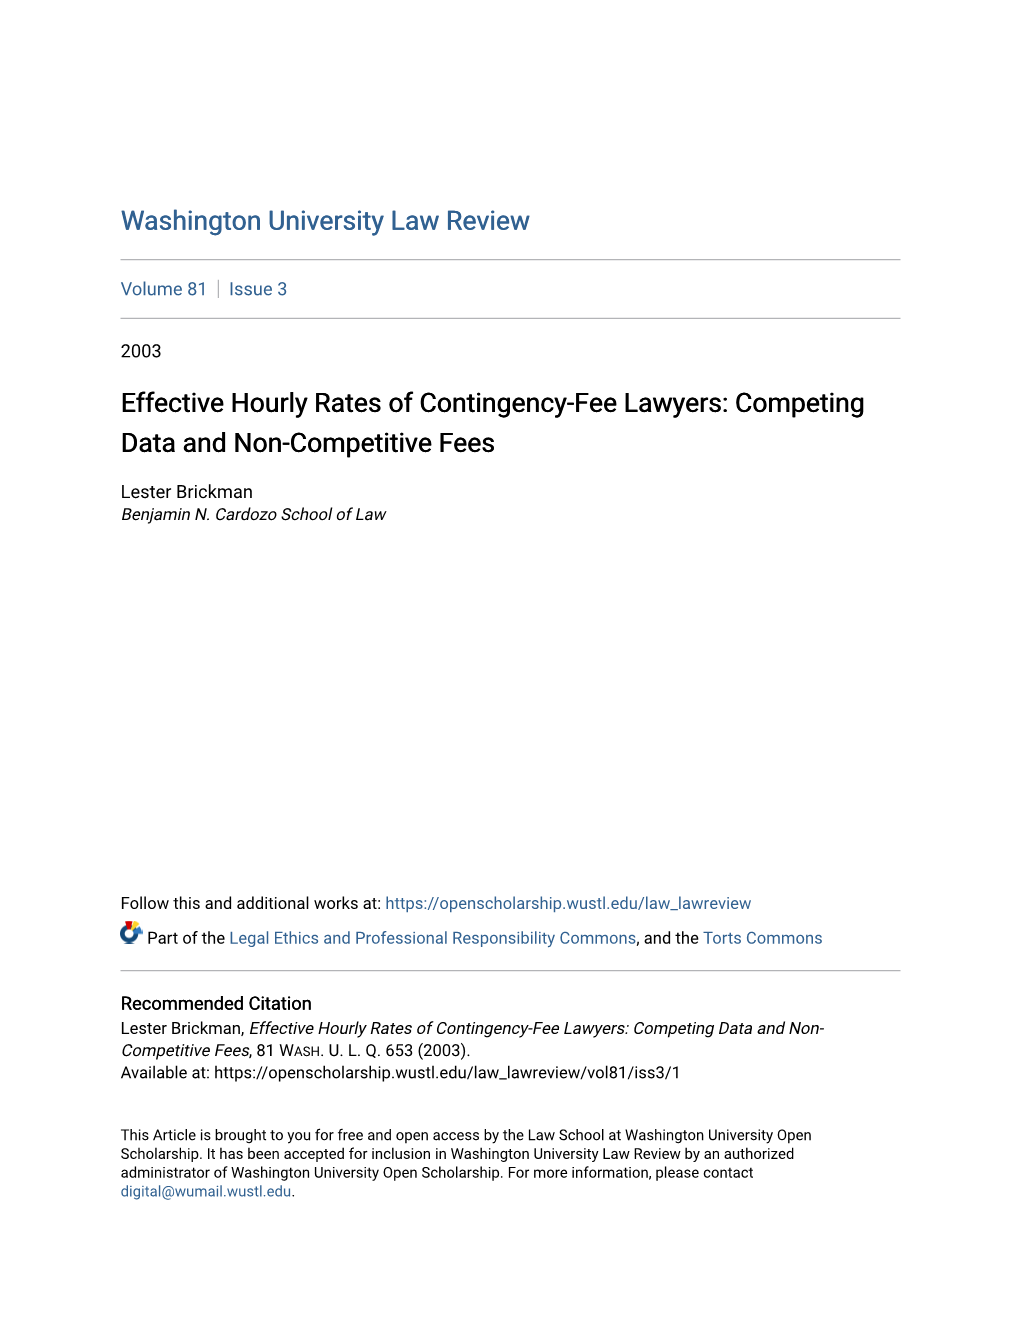 Effective Hourly Rates of Contingency-Fee Lawyers: Competing Data and Non-Competitive Fees